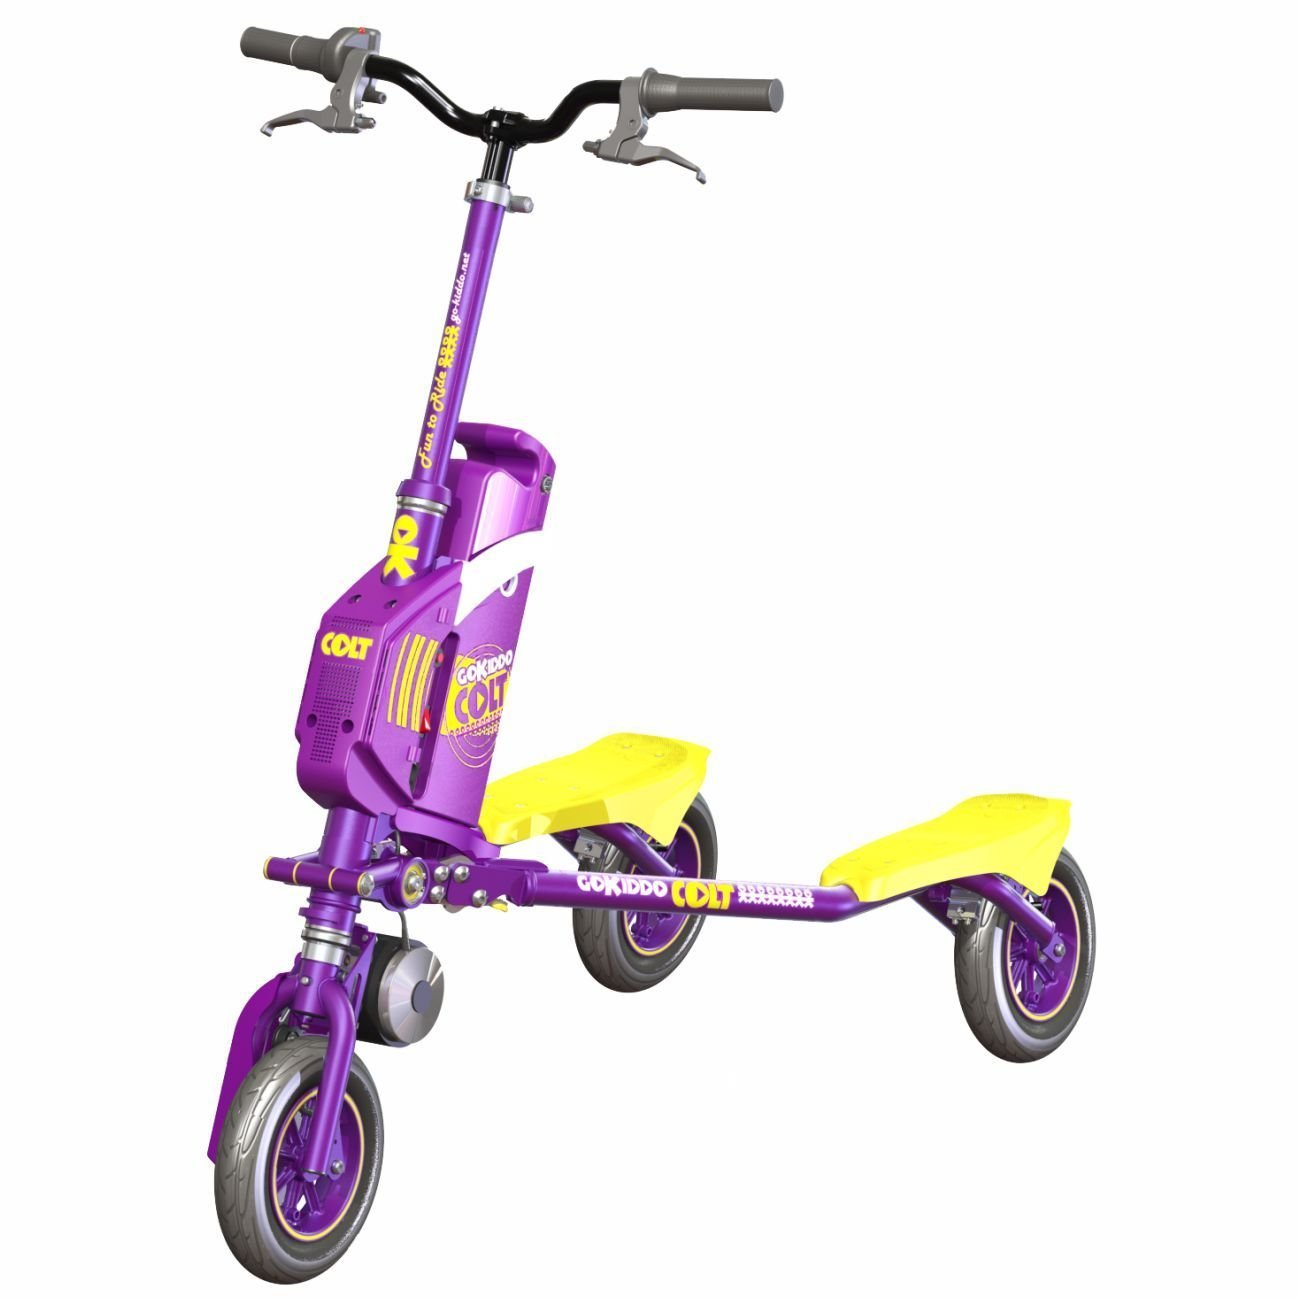 Go-Kiddo COLT Electric Carving Scooter (Purple) Just $97.83 Shipped!